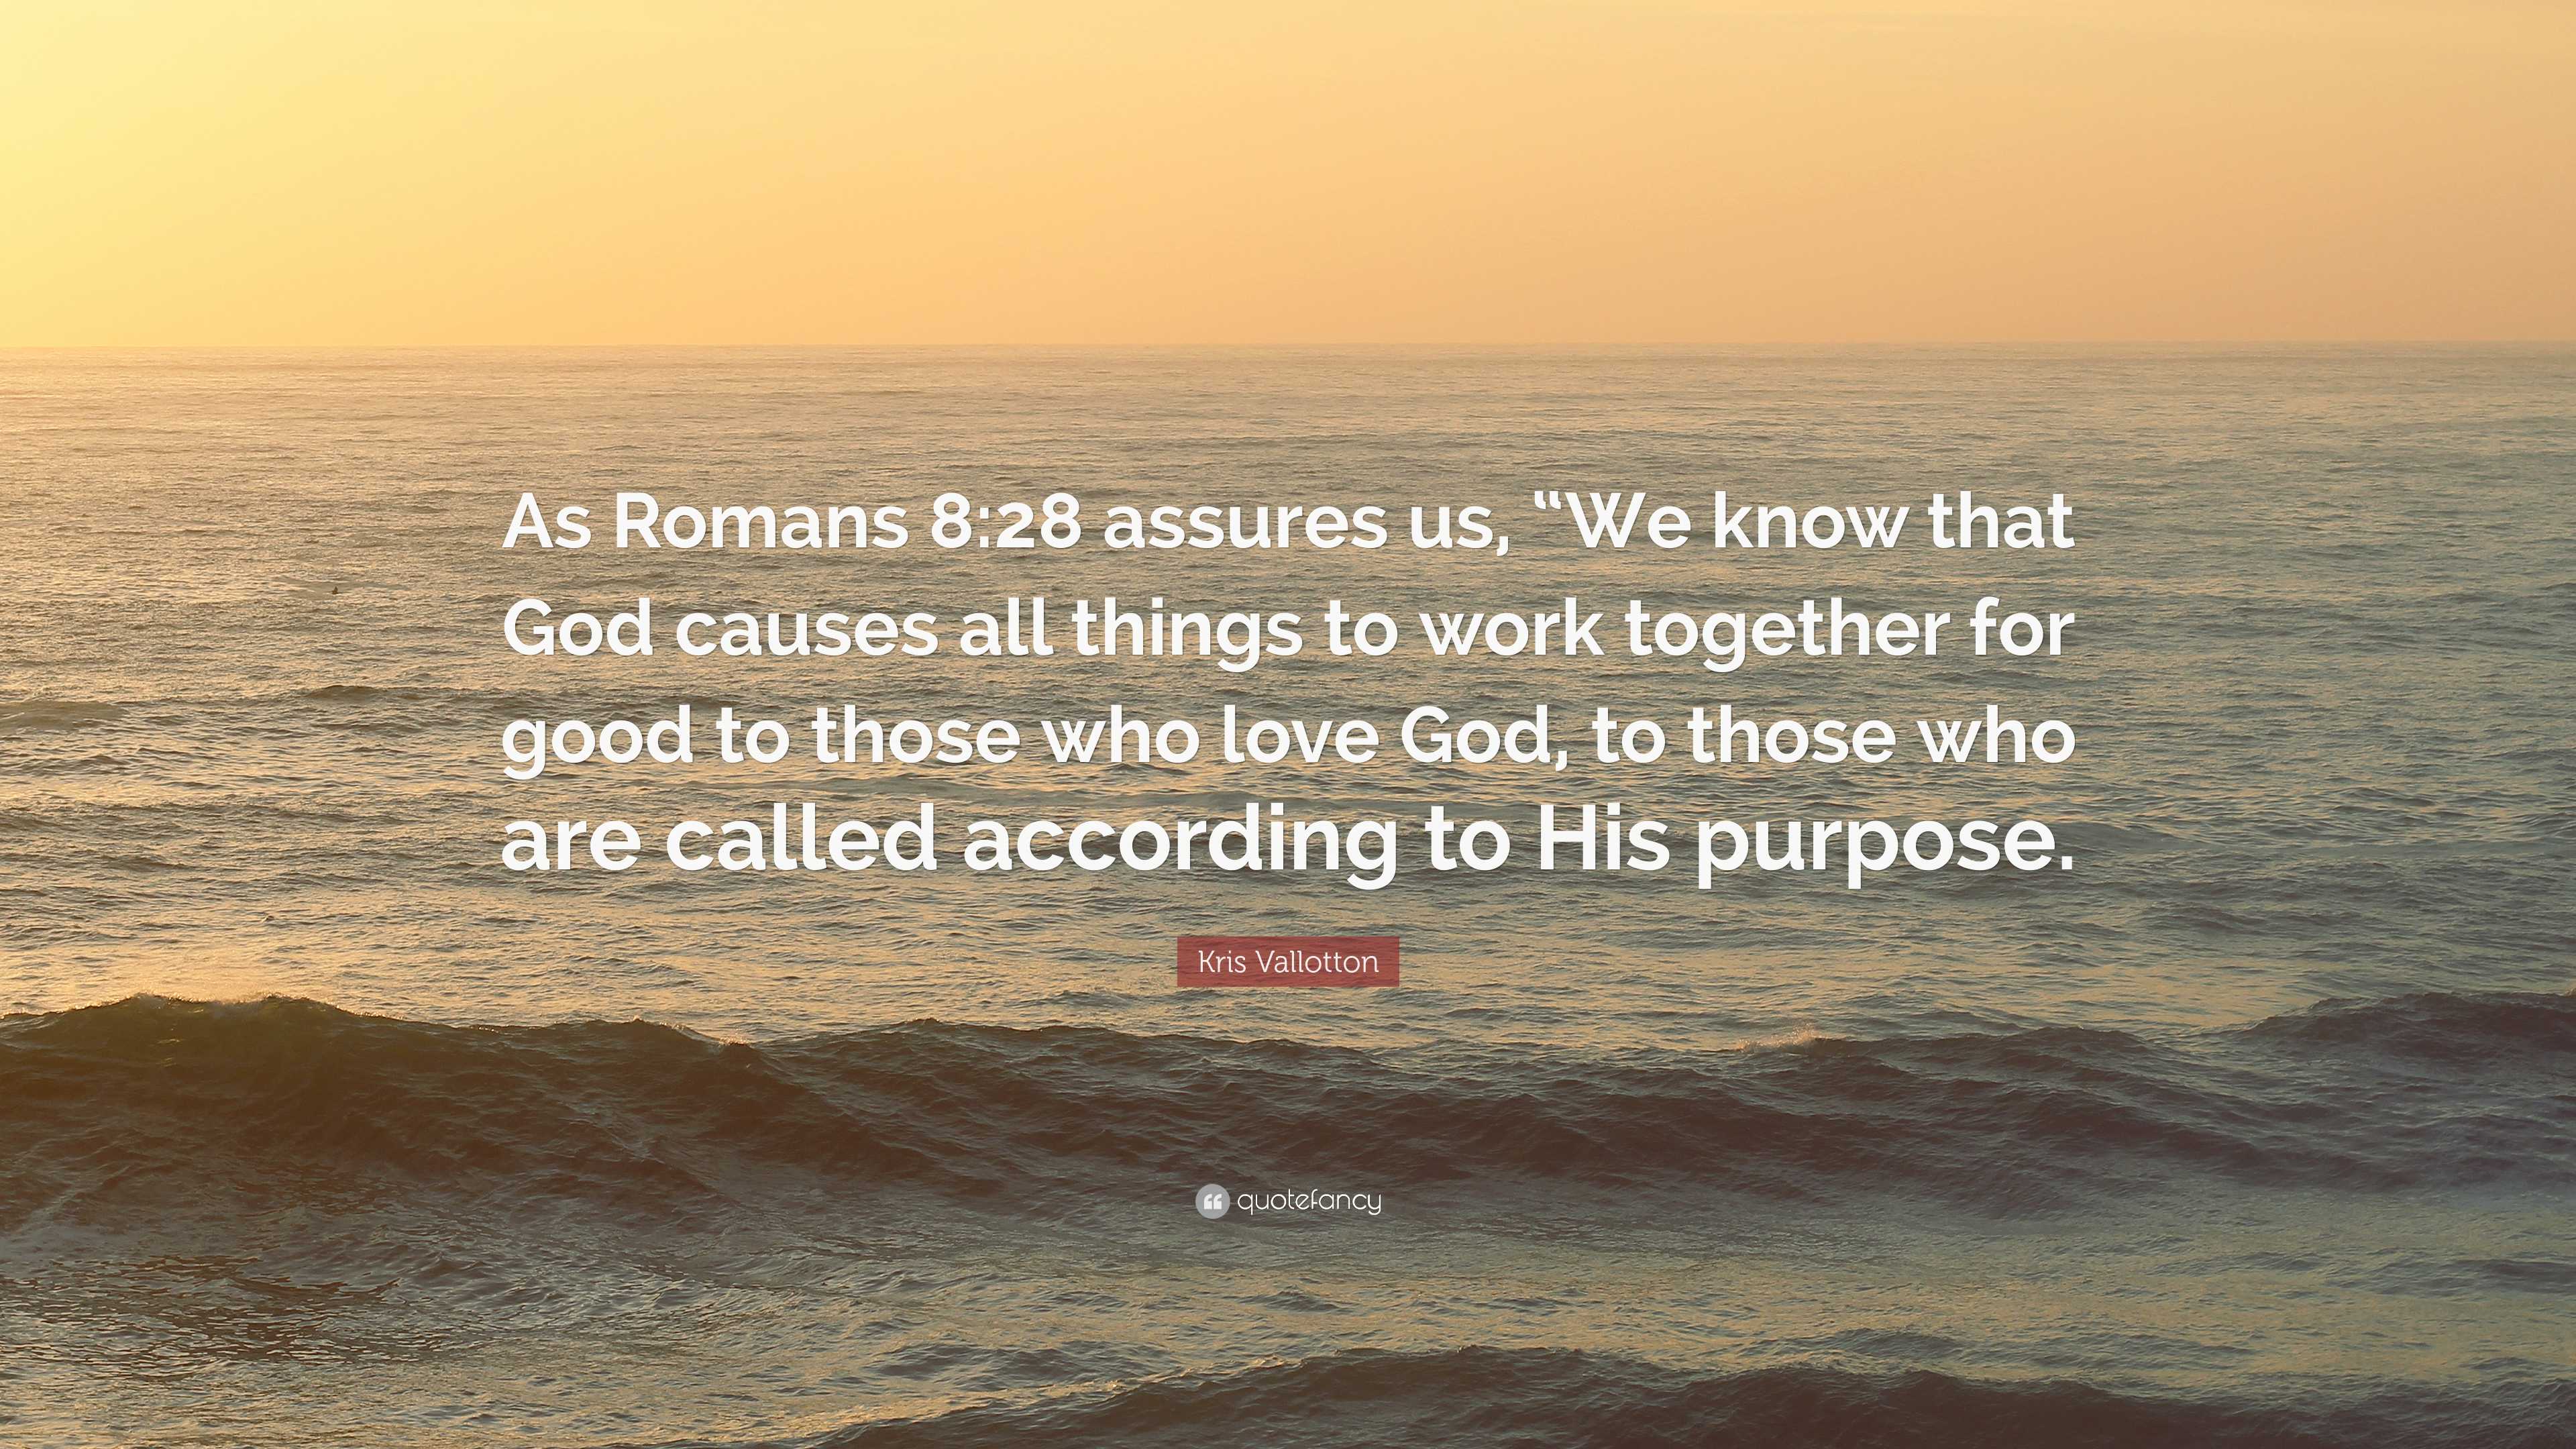 The Greater Good – Romans 8:28, Part 3